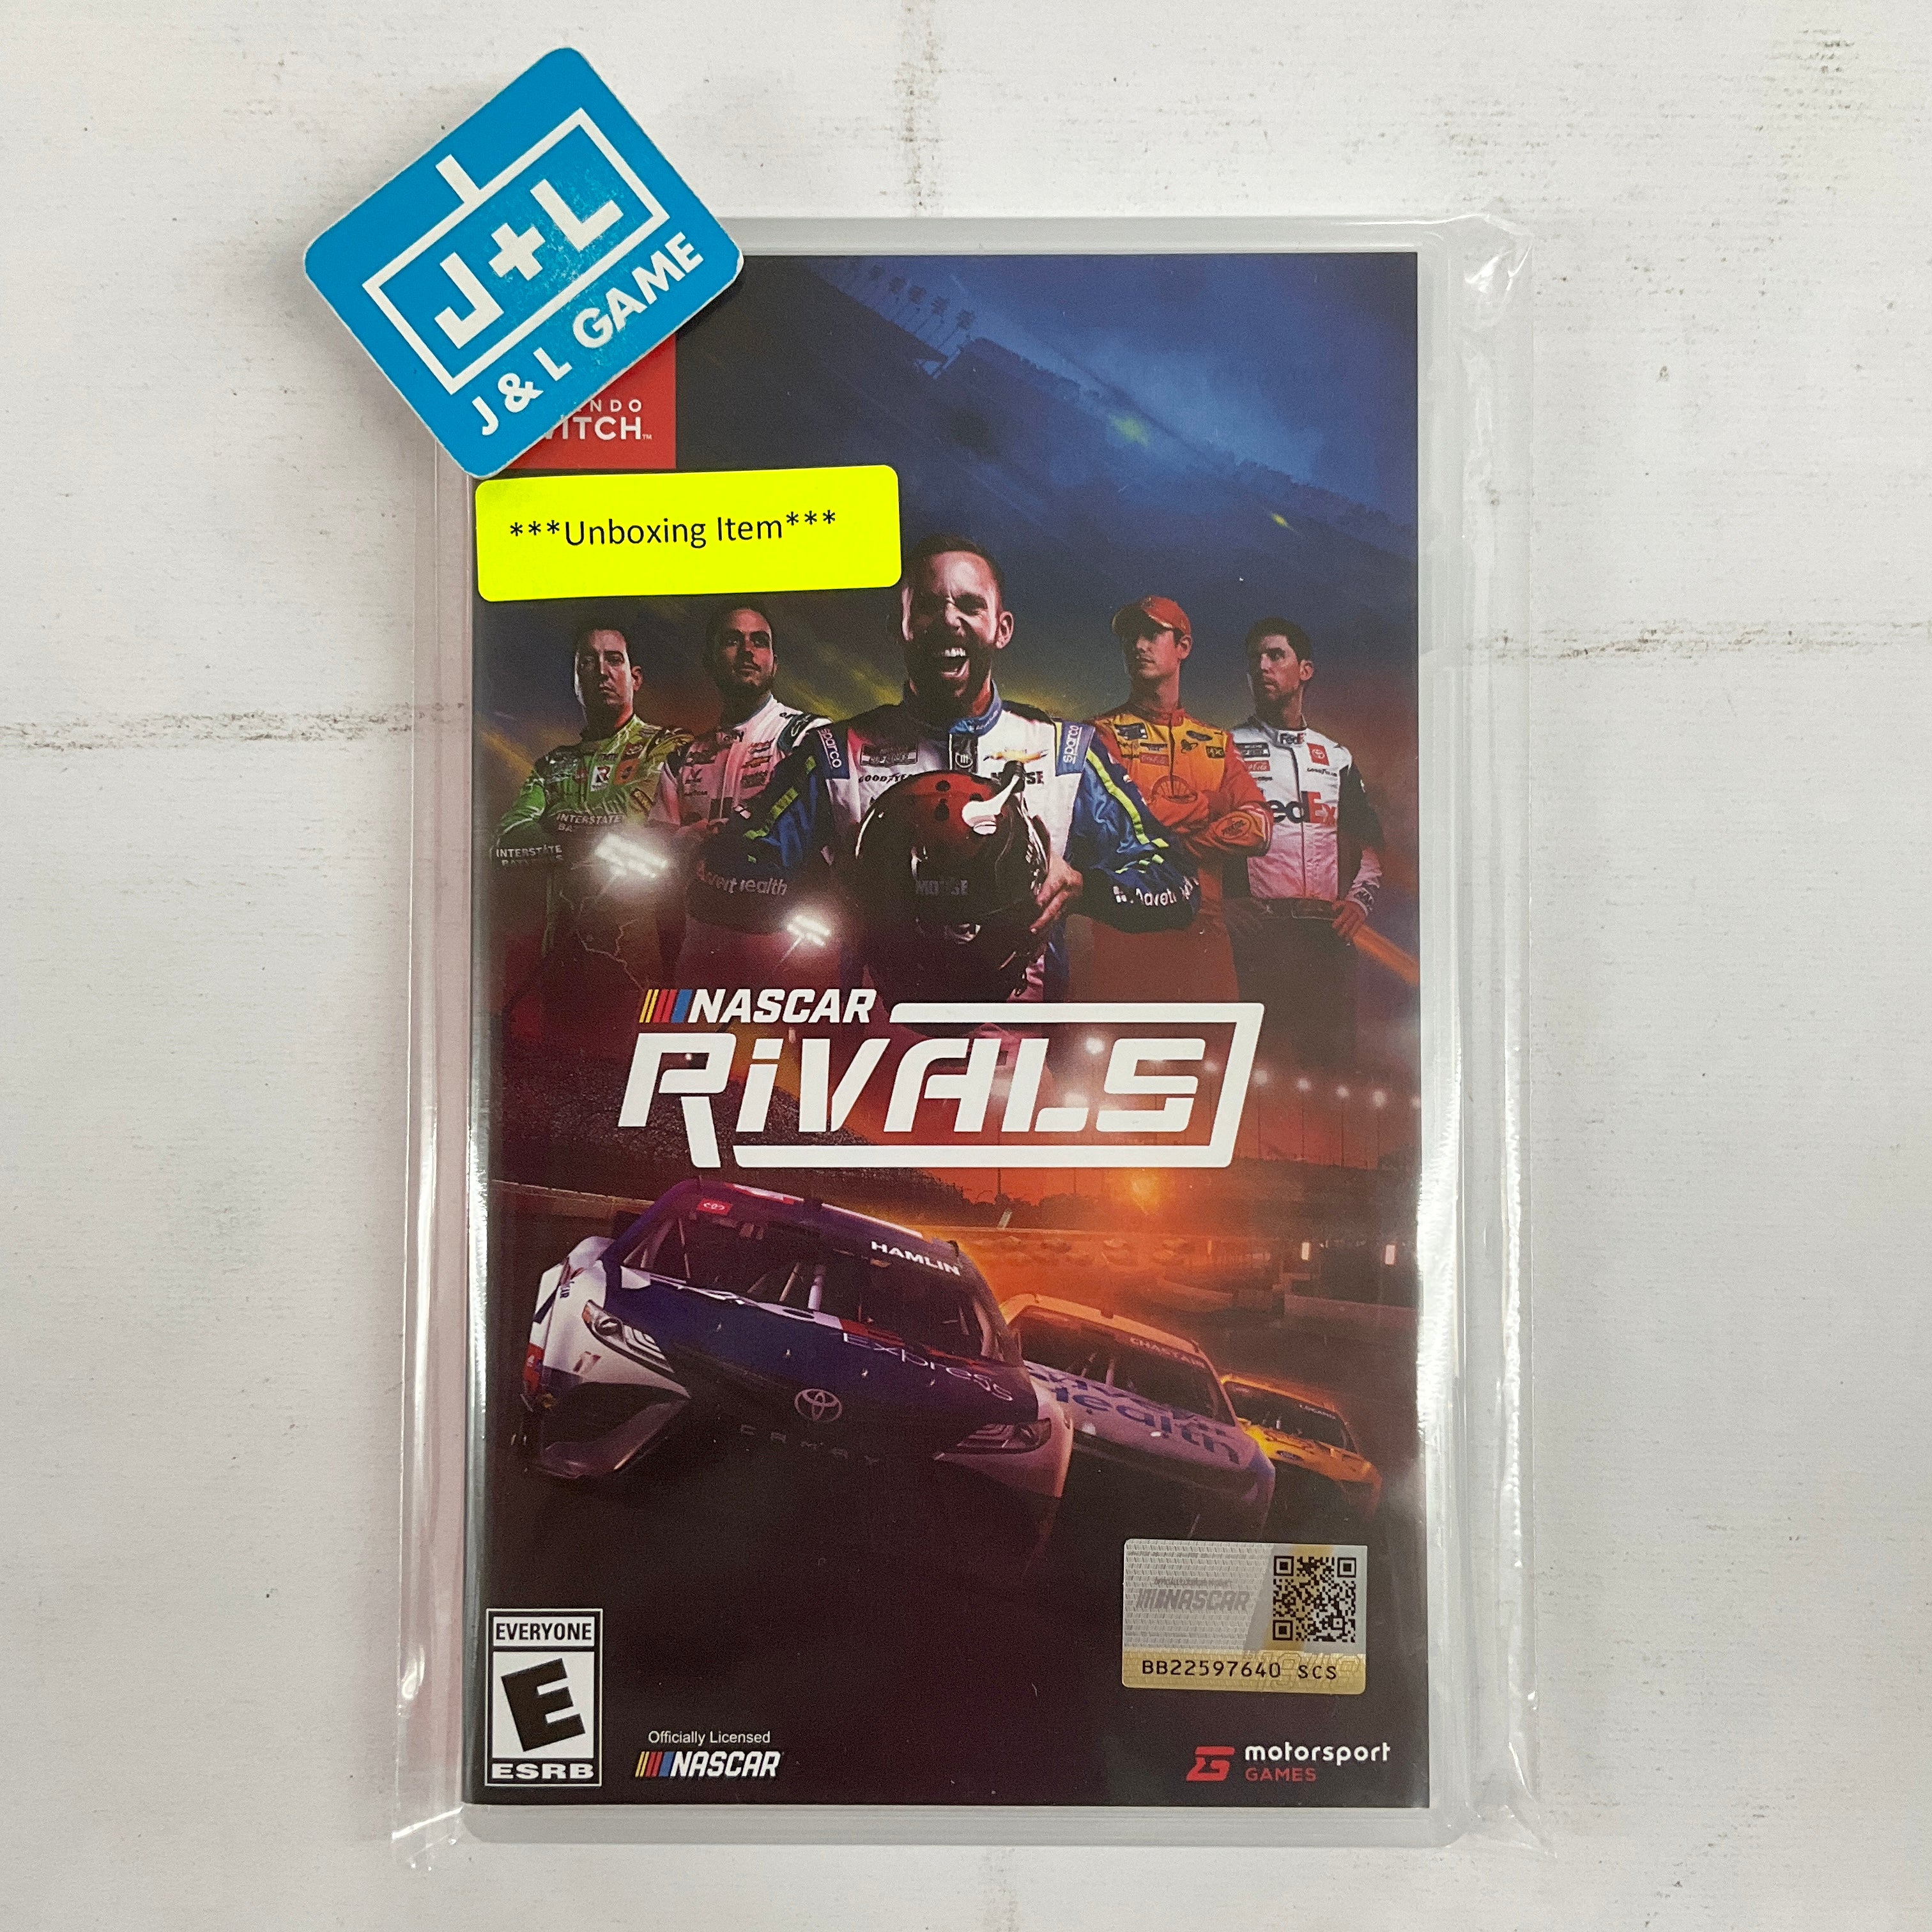 NASCAR Rivals - (NSW) Nintendo Switch [UNBOXING] Video Games Motorsport Games   